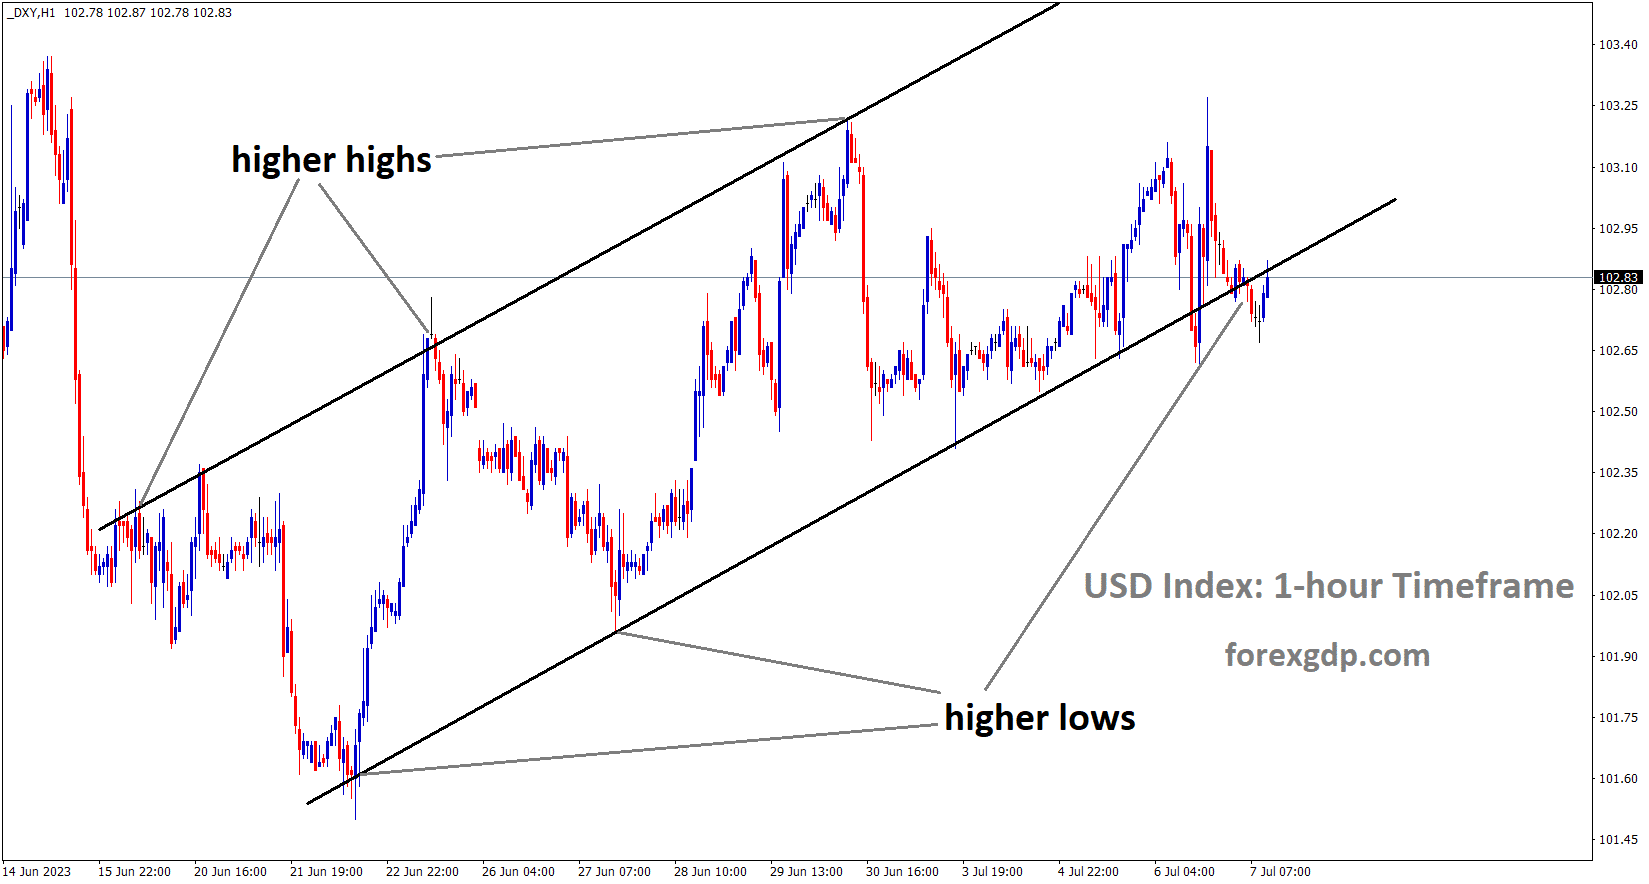 DXY Index is moving in an Ascending channel and the market has reached the higher low area of the channel